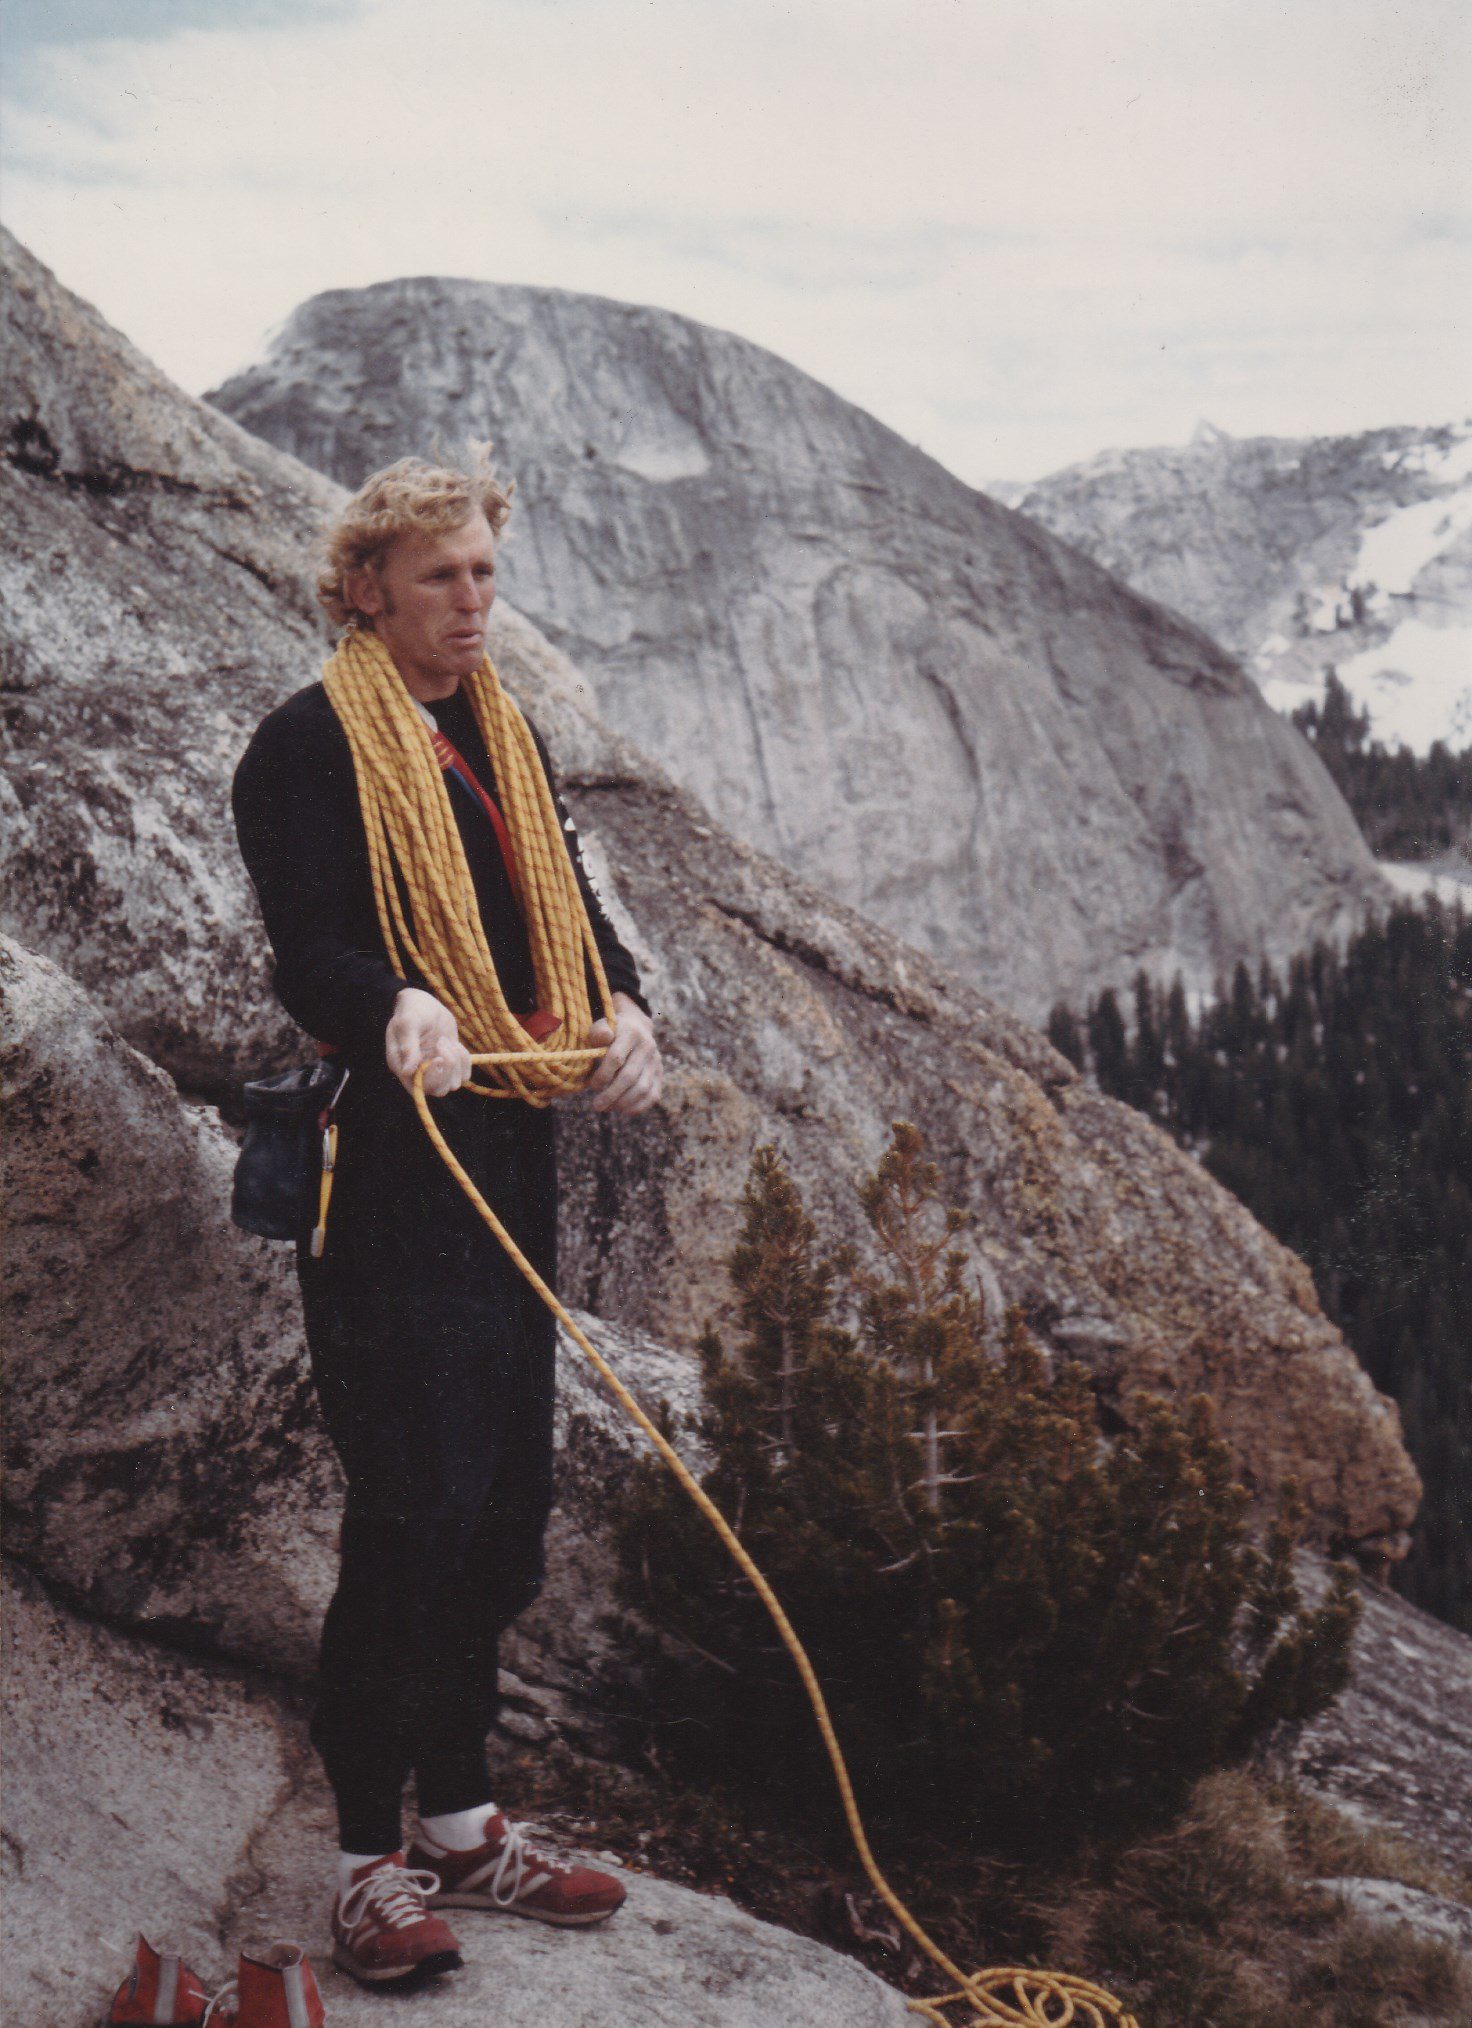 Bachar on top of Gray Ghost in the mid 1980s. Photo by Pat Ament